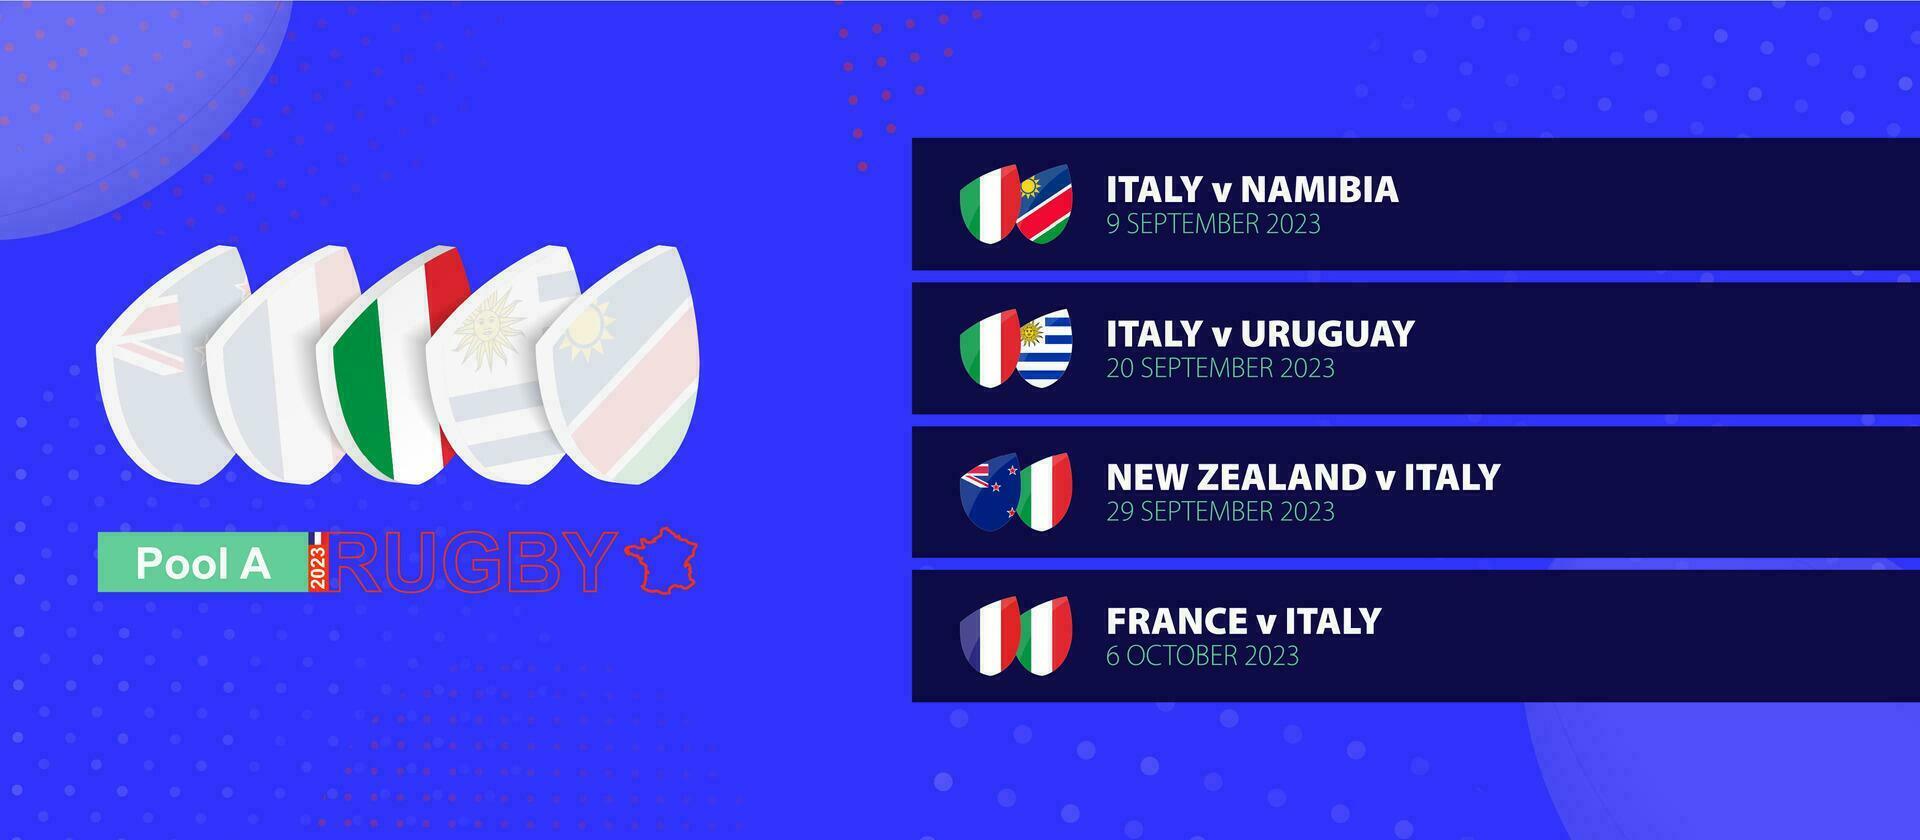 Italy rugby national team schedule matches in group stage of international rugby competition. vector